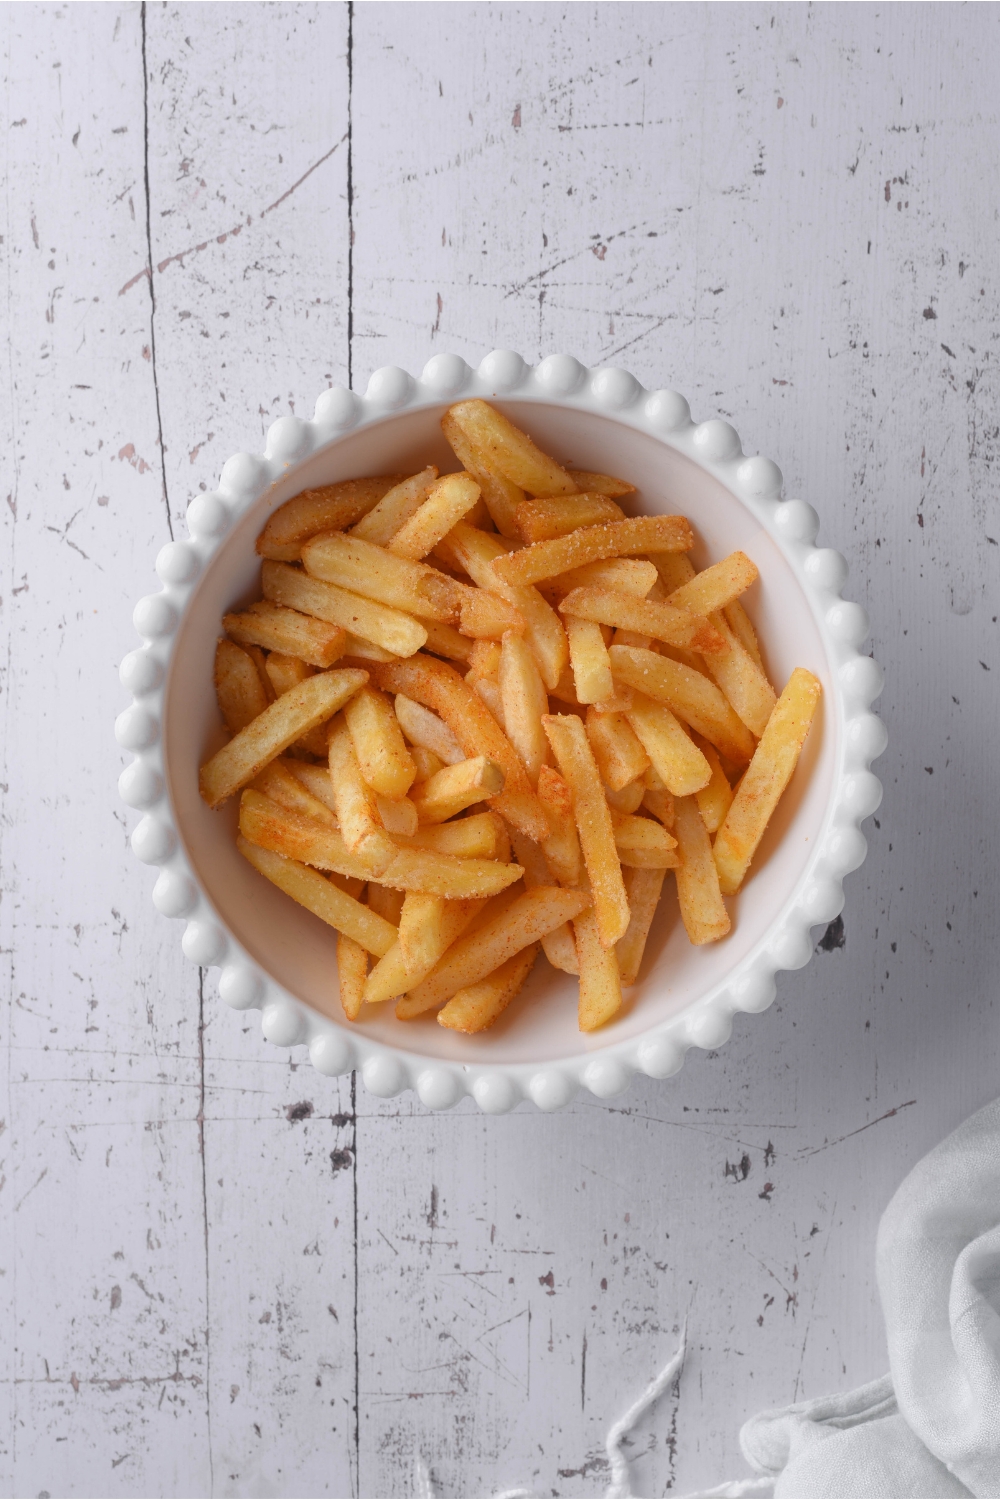 A white decorative bowl filled with cooked seasoned french fries.